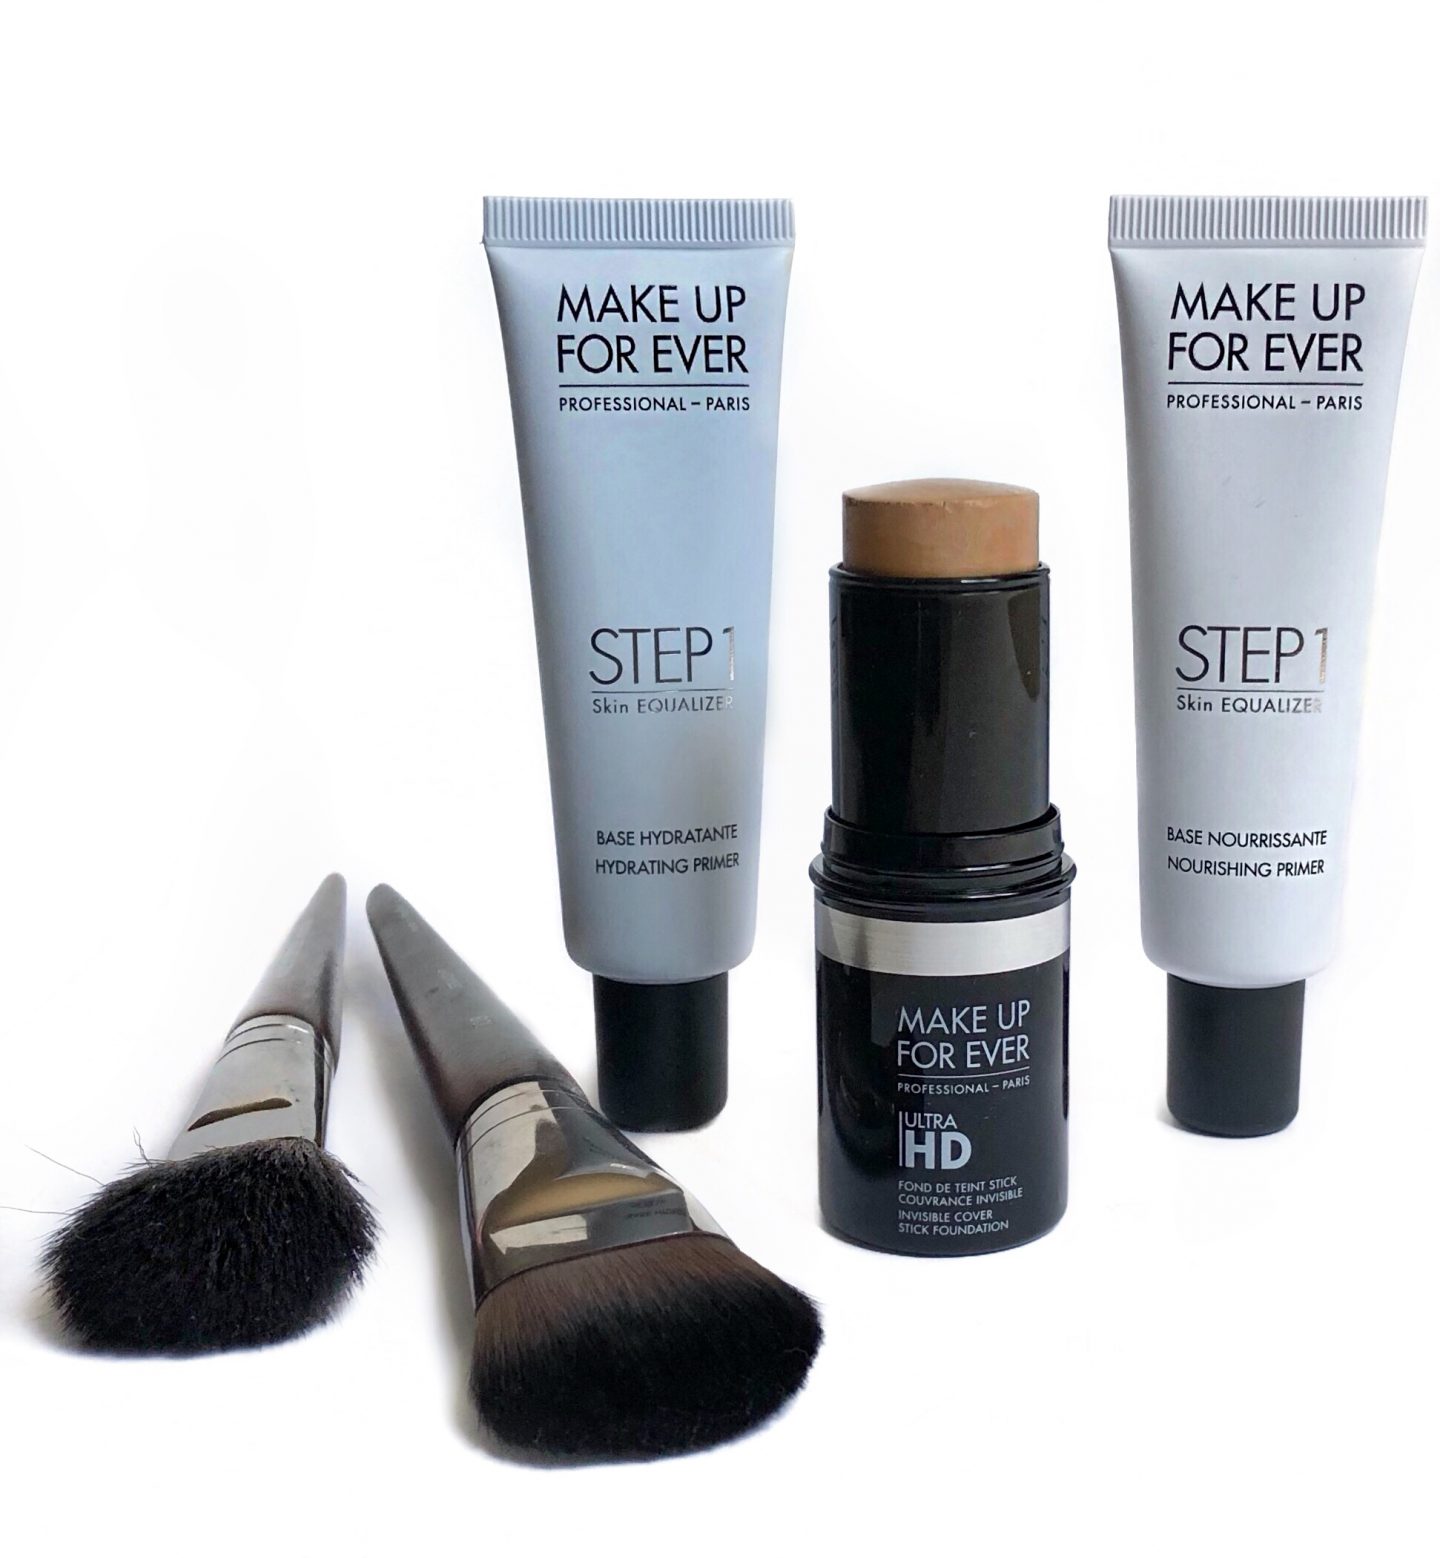 Make Up For Ever Ultra HD Invisible Cover Stick Foundation & Step 1 Skin Equalizer Primers